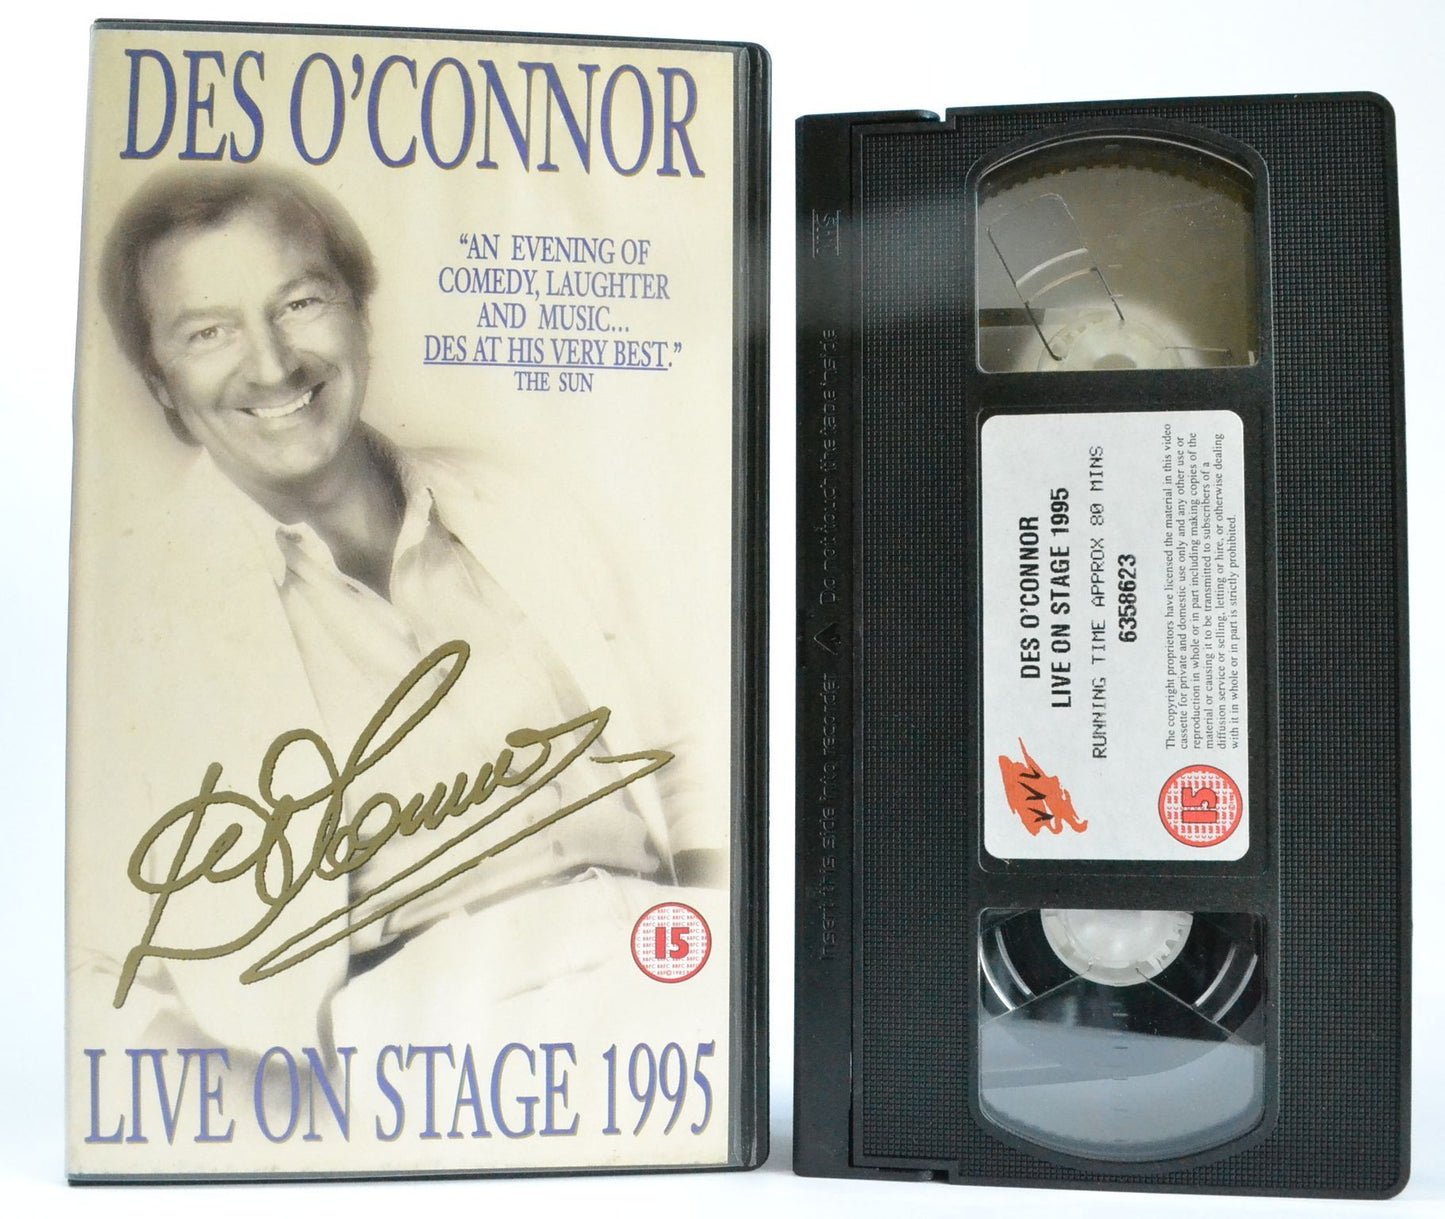 Des O’Conner: Live On Stage 1995 - Love Affair With The Audience - Comedy - VHS-